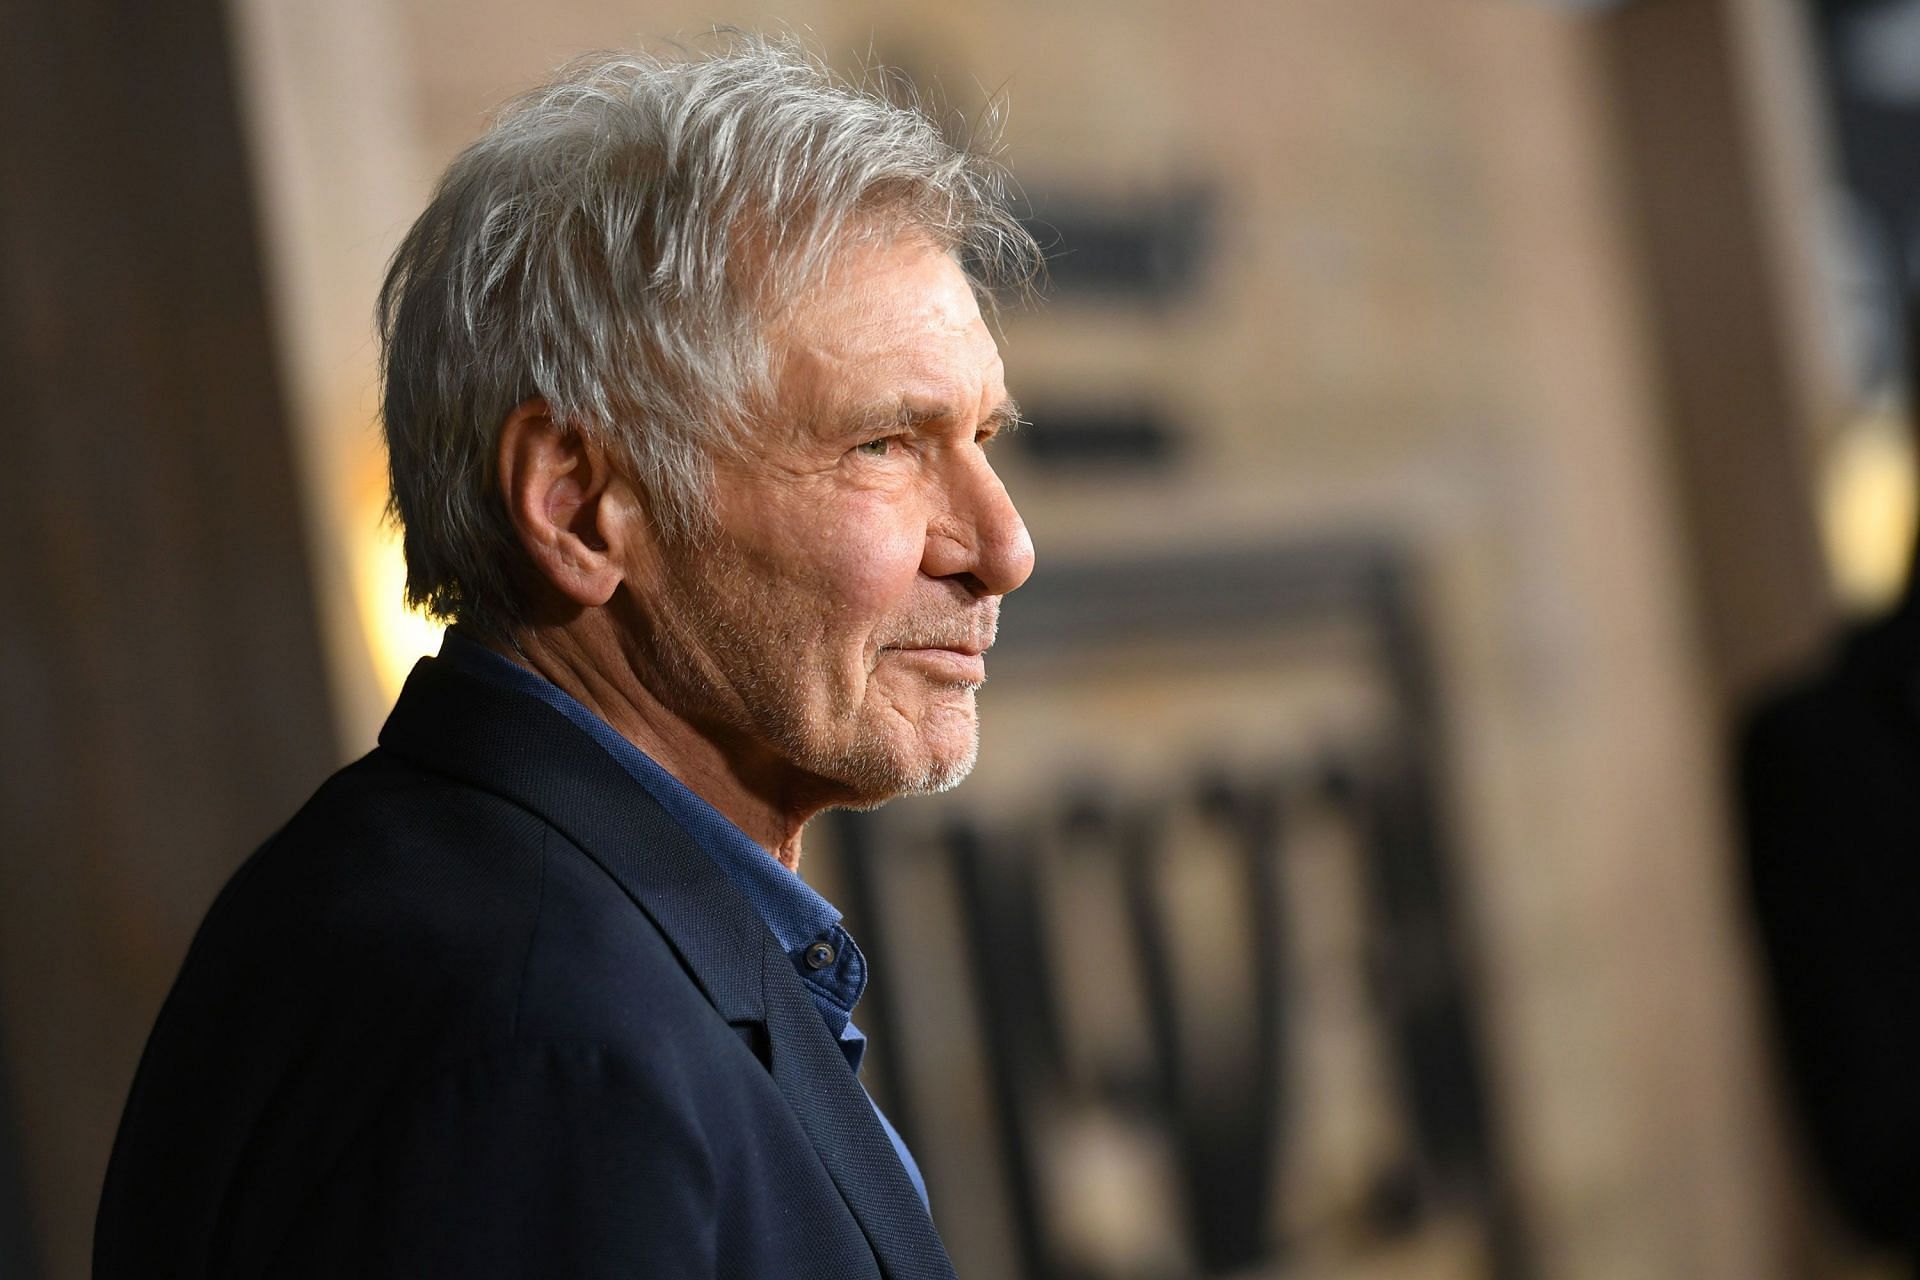 Harrison Ford joins the Marvel Cinematic Universe as Thunderbolt Ross, revealing his reason for entering the world of superheroes (Image via Getty)